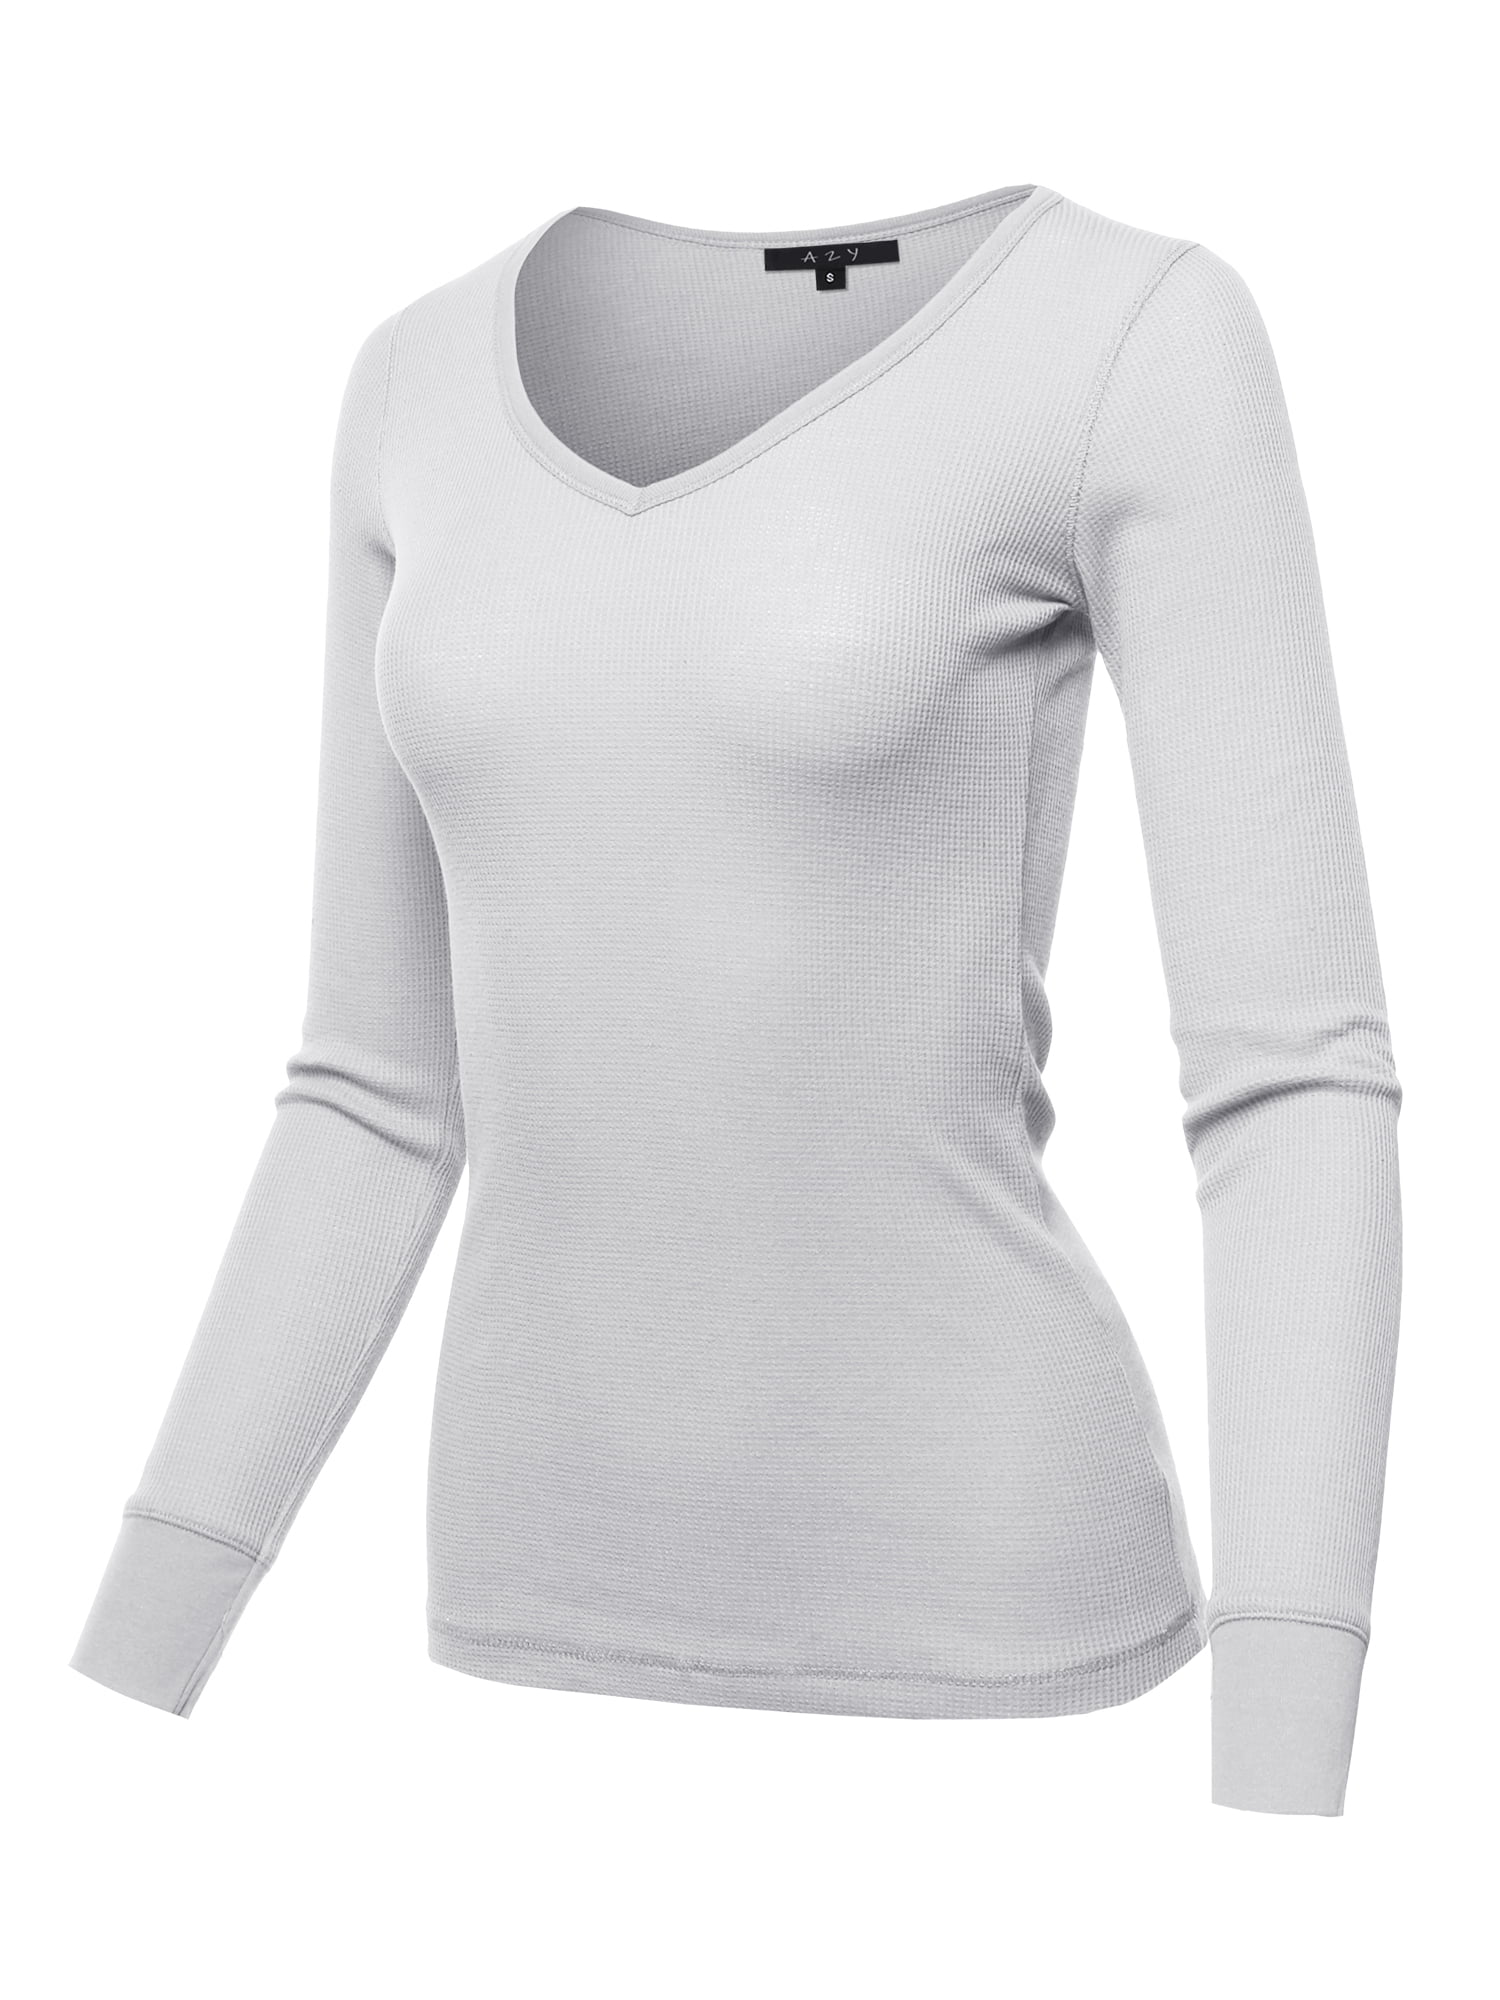 A2Y - A2Y Women's Basic Solid Long Sleeve V Neck Fitted Thermal Top ...